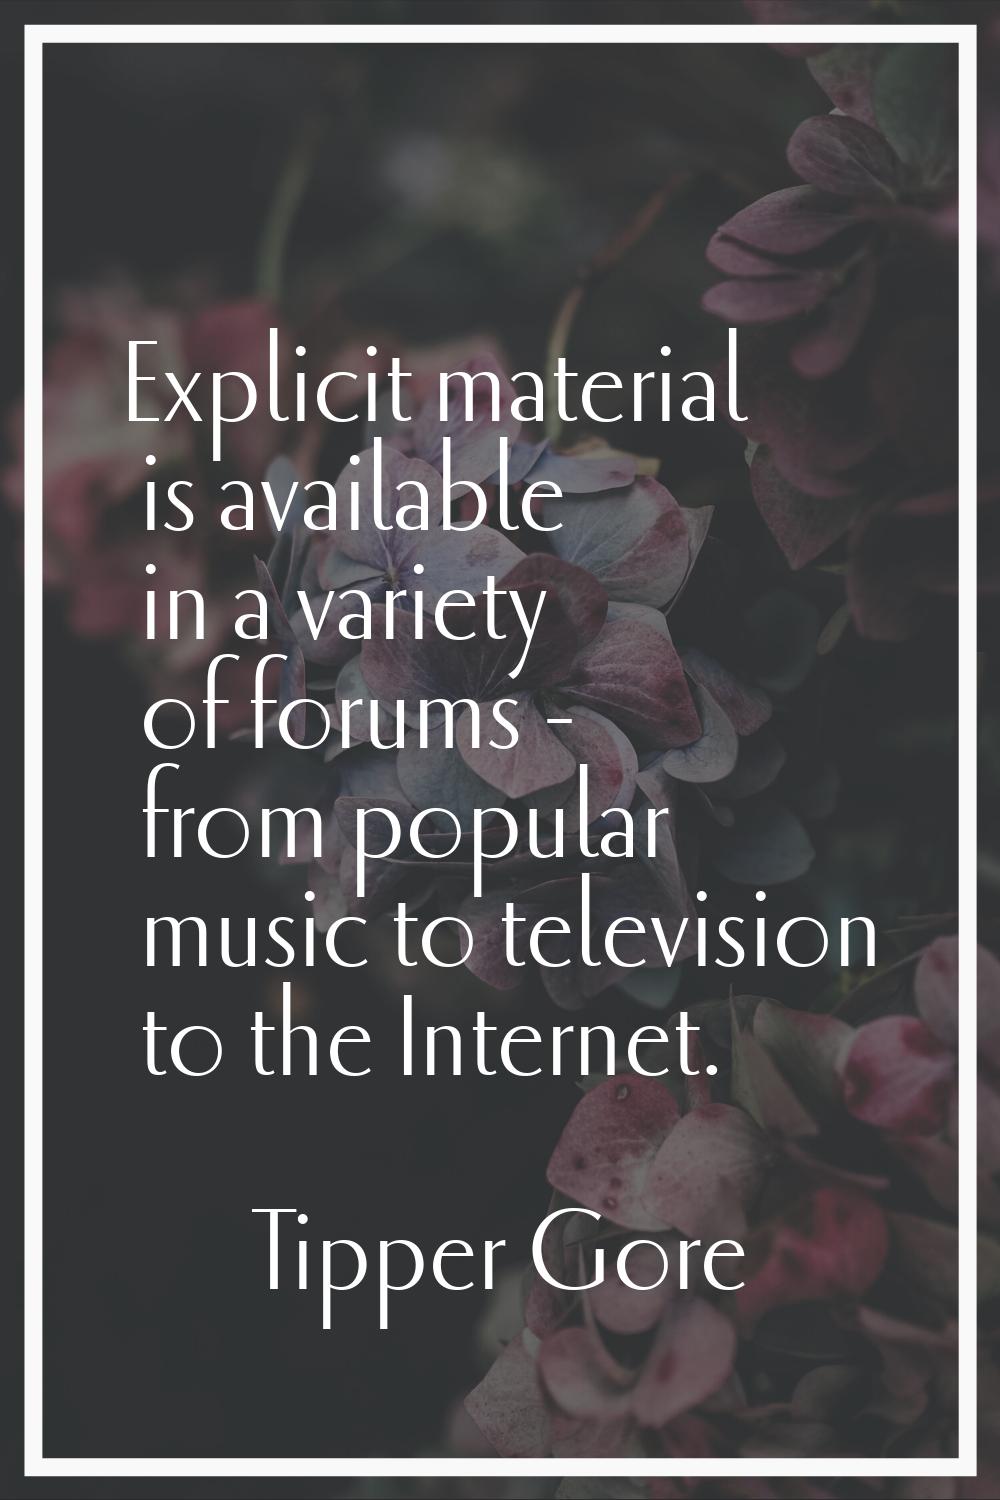 Explicit material is available in a variety of forums - from popular music to television to the Int